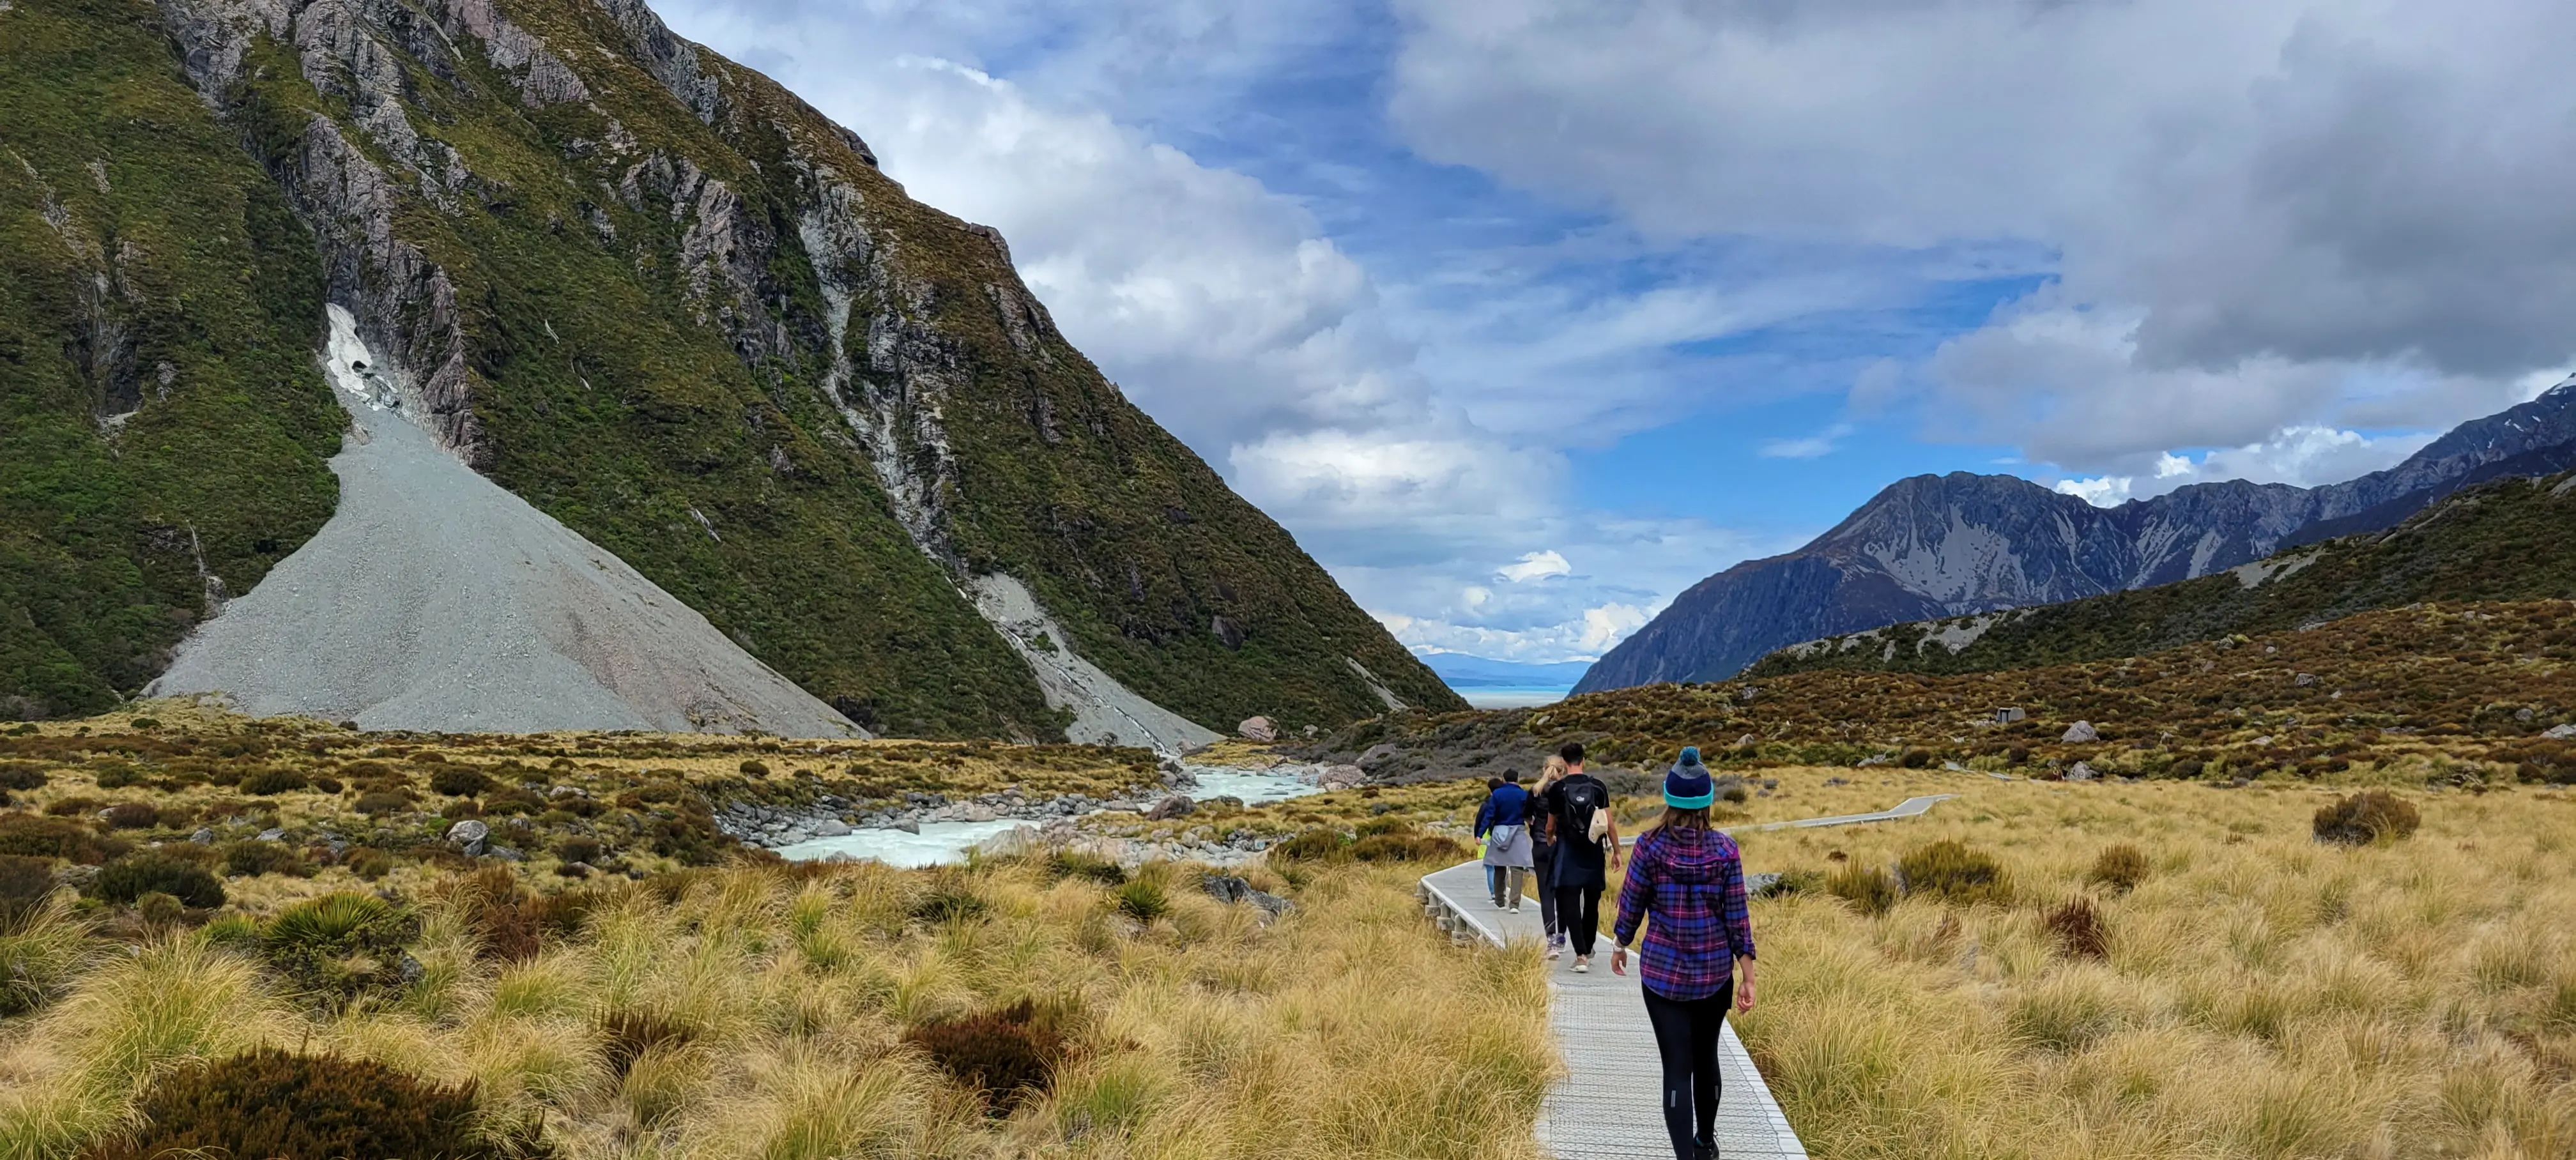 hooker valley track hikers